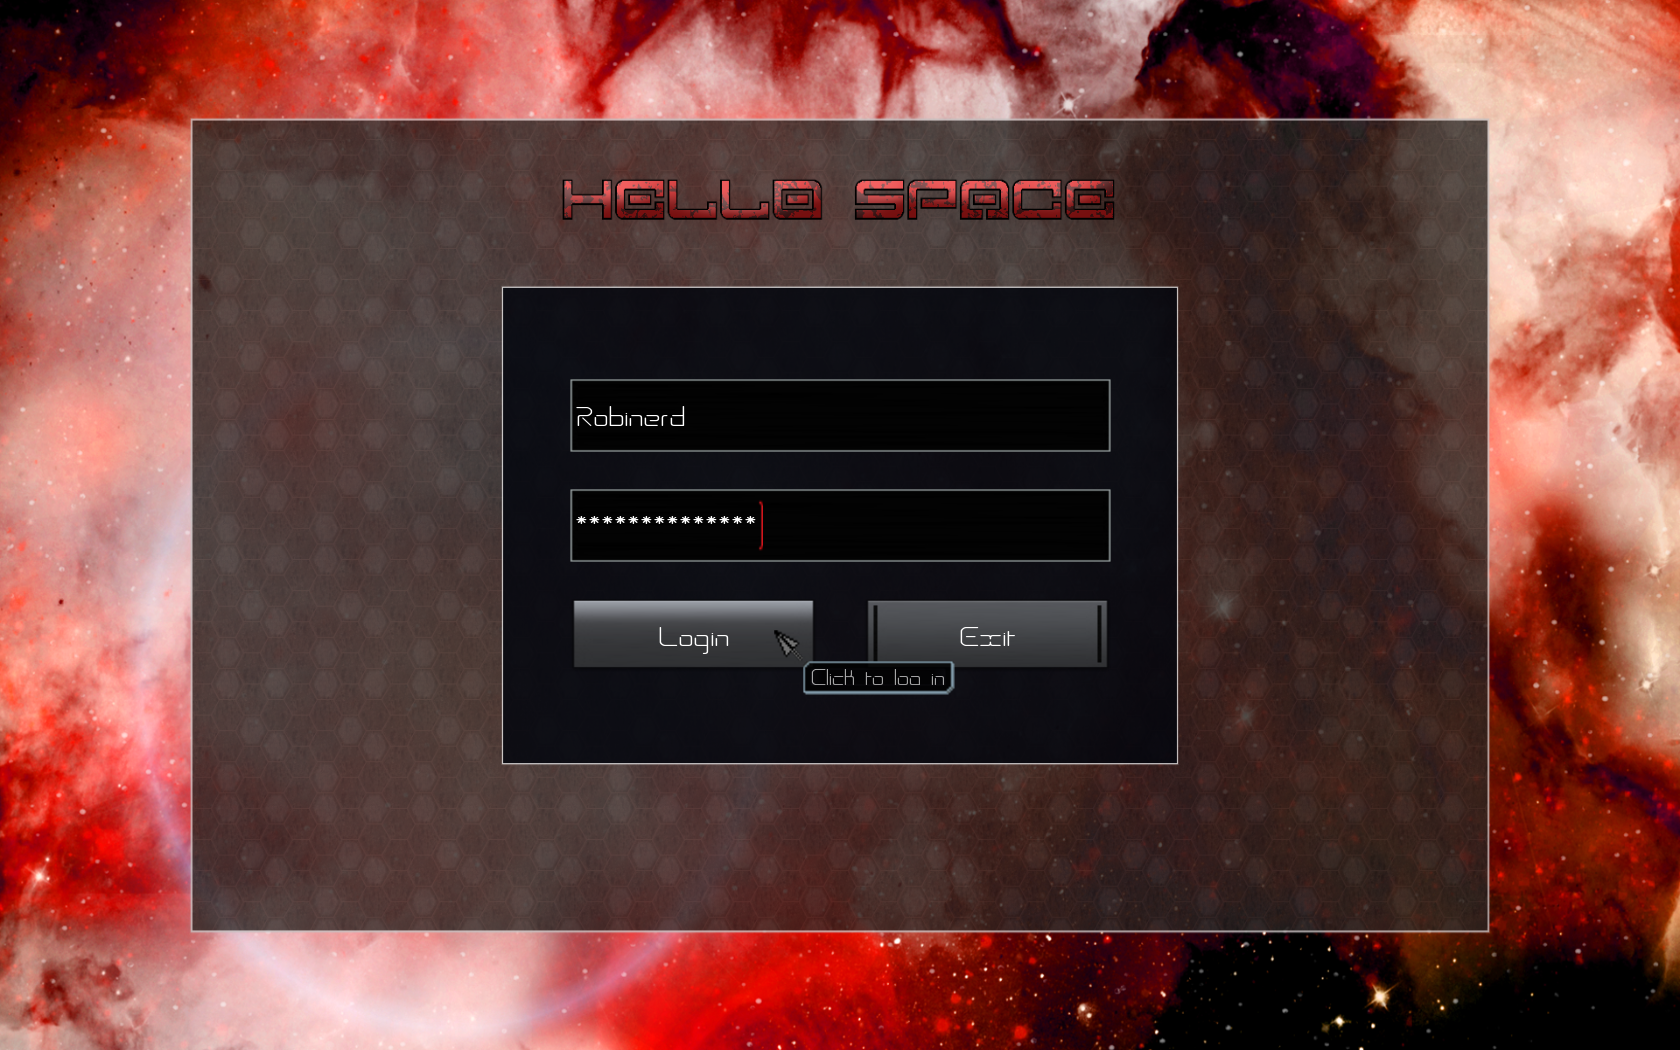 Is a login screen allowed to be published? - Game Design Support